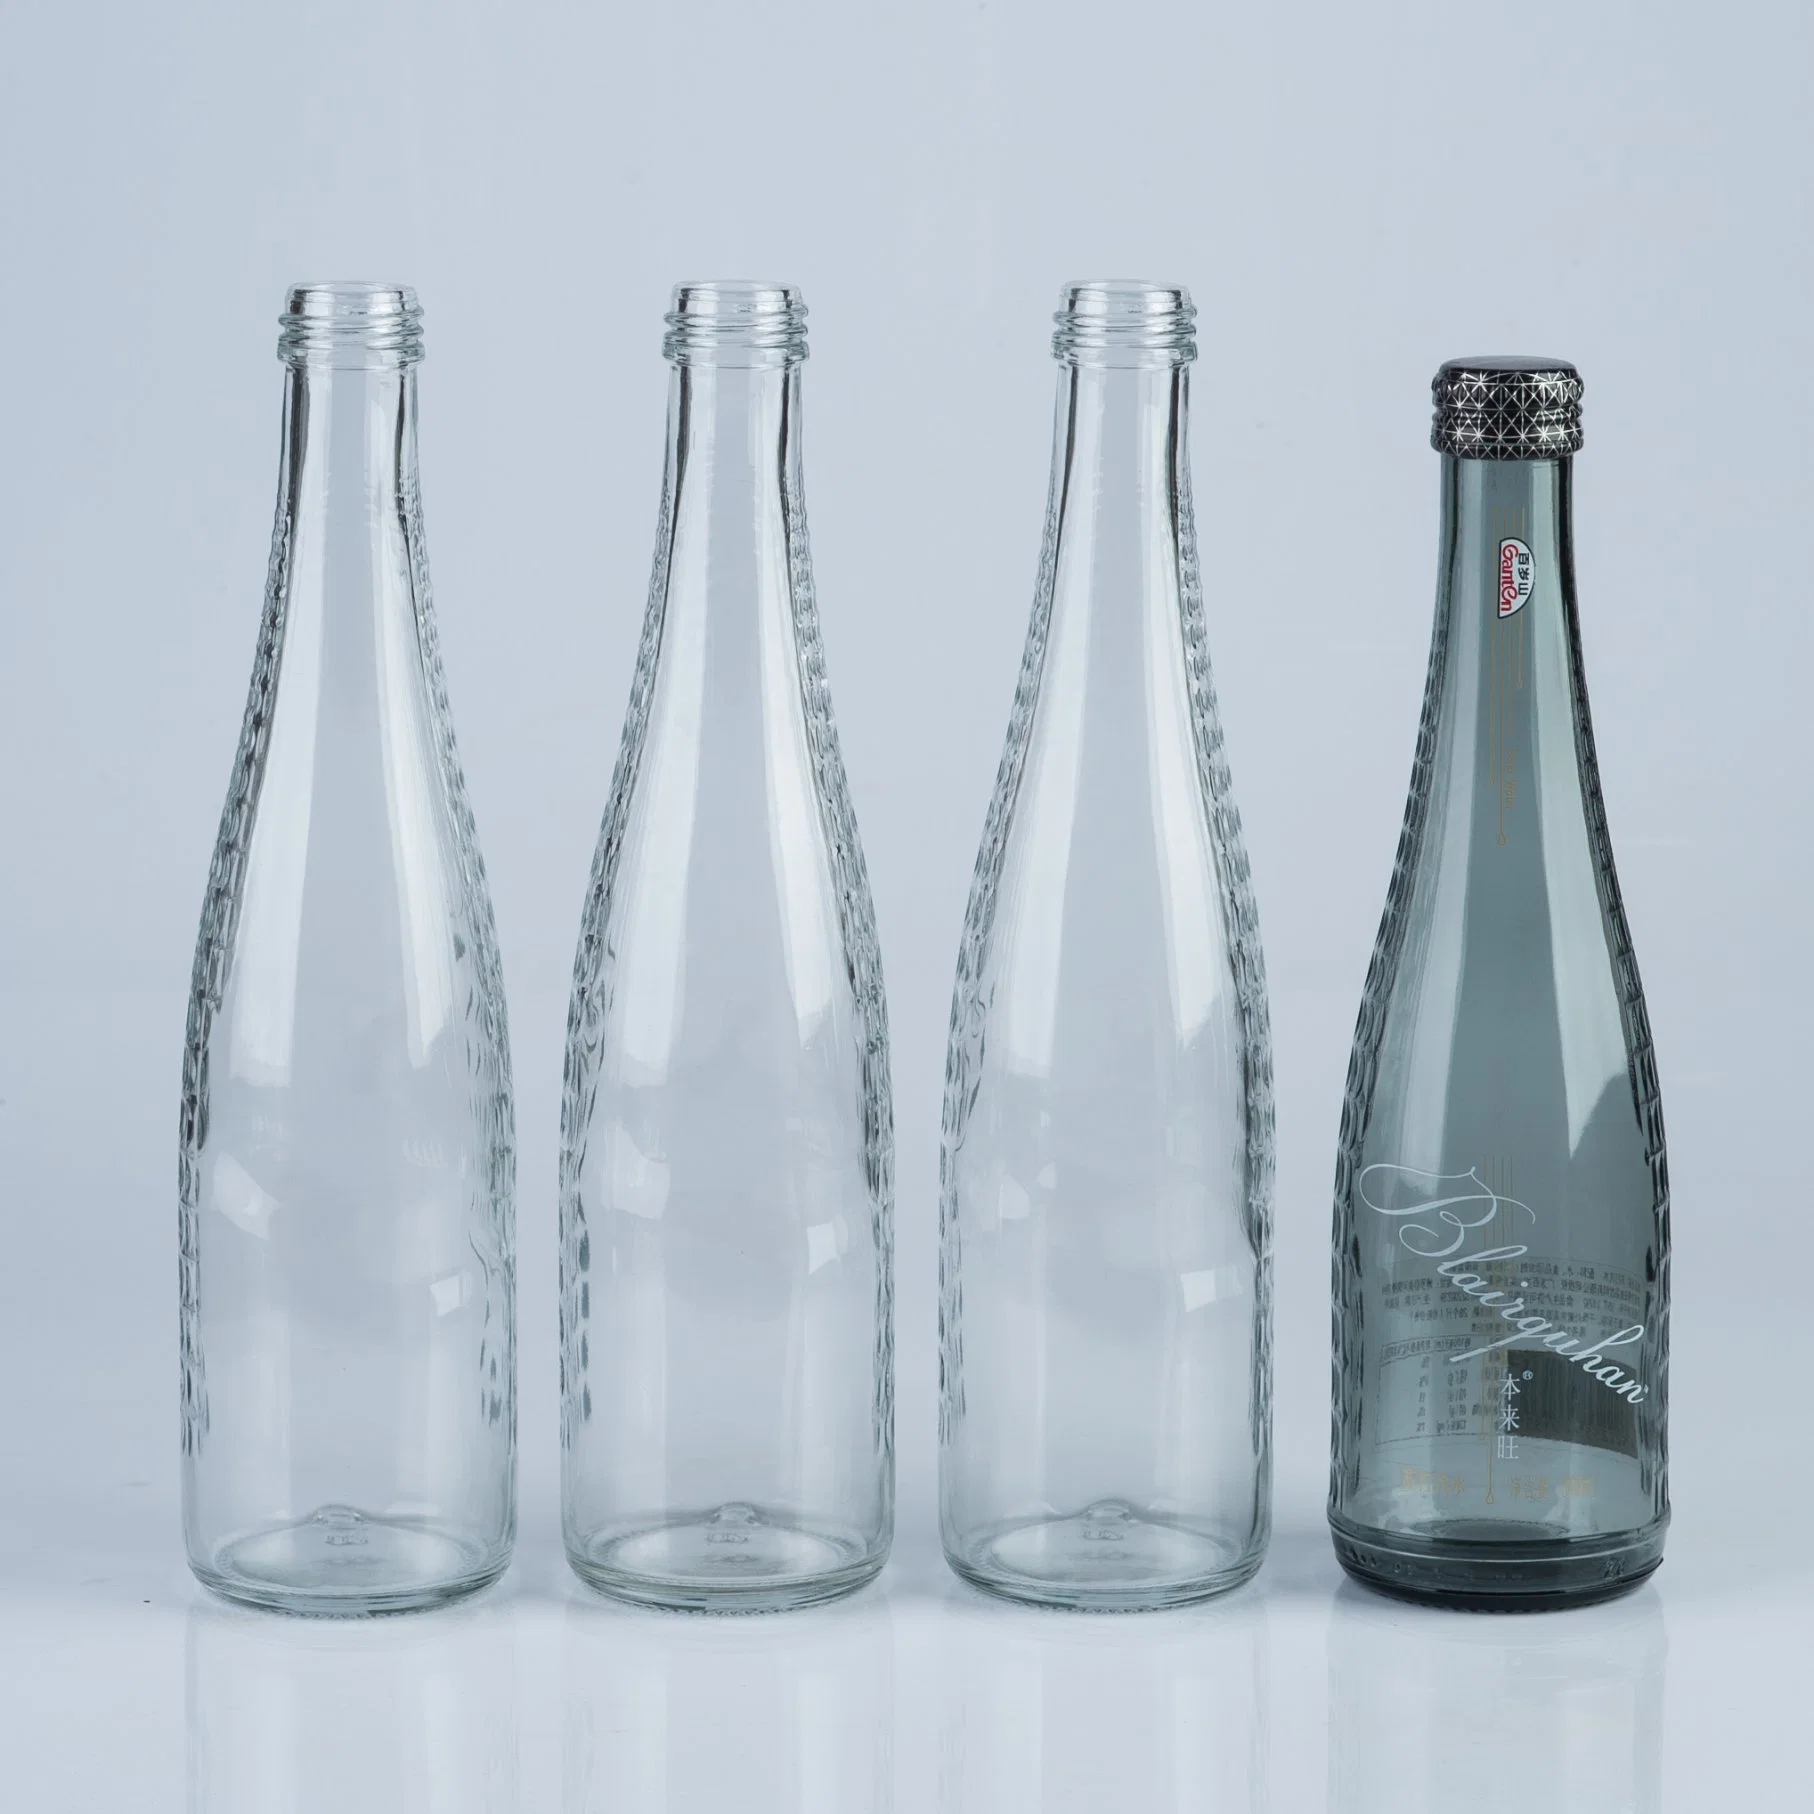 300ml 750ml Mineral Water Glass Bottle with Screw Plastic Cap/ Empty Mineral Water Glass Bottle